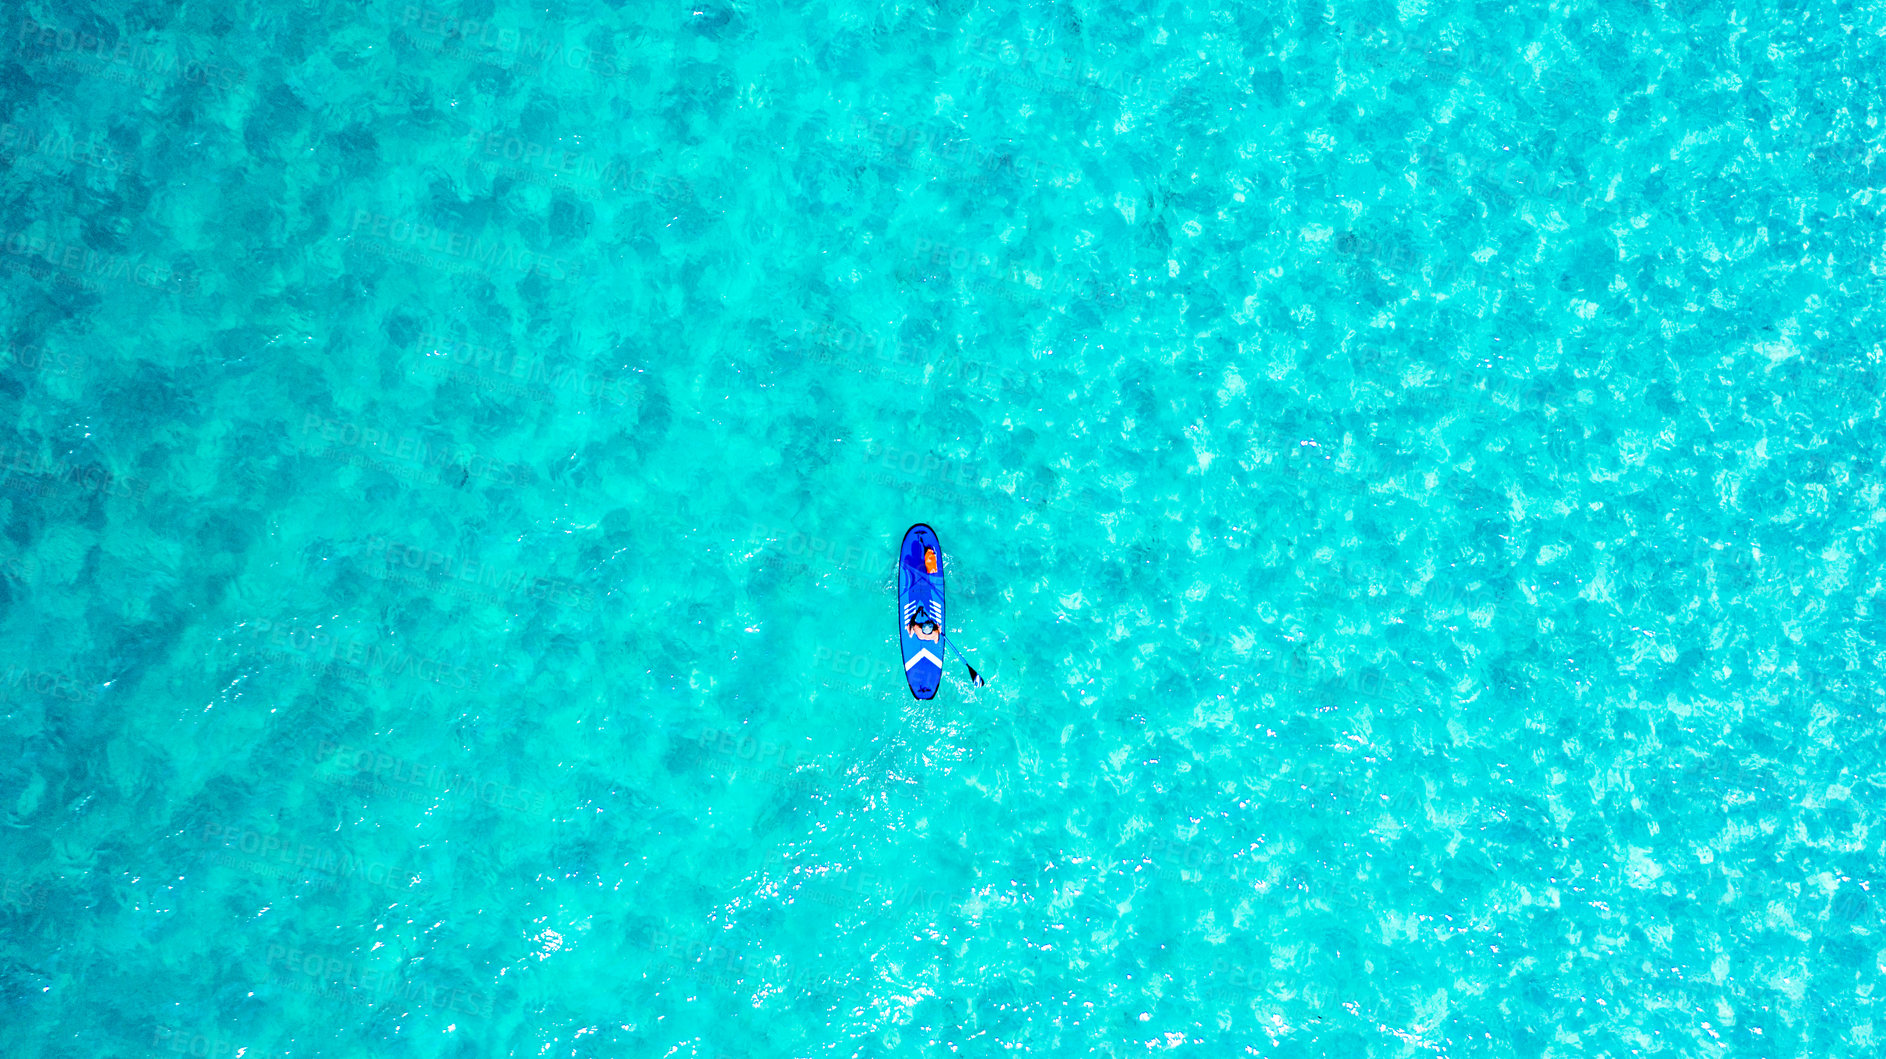 Buy stock photo High angle shot of a man paddle boarding across the sea